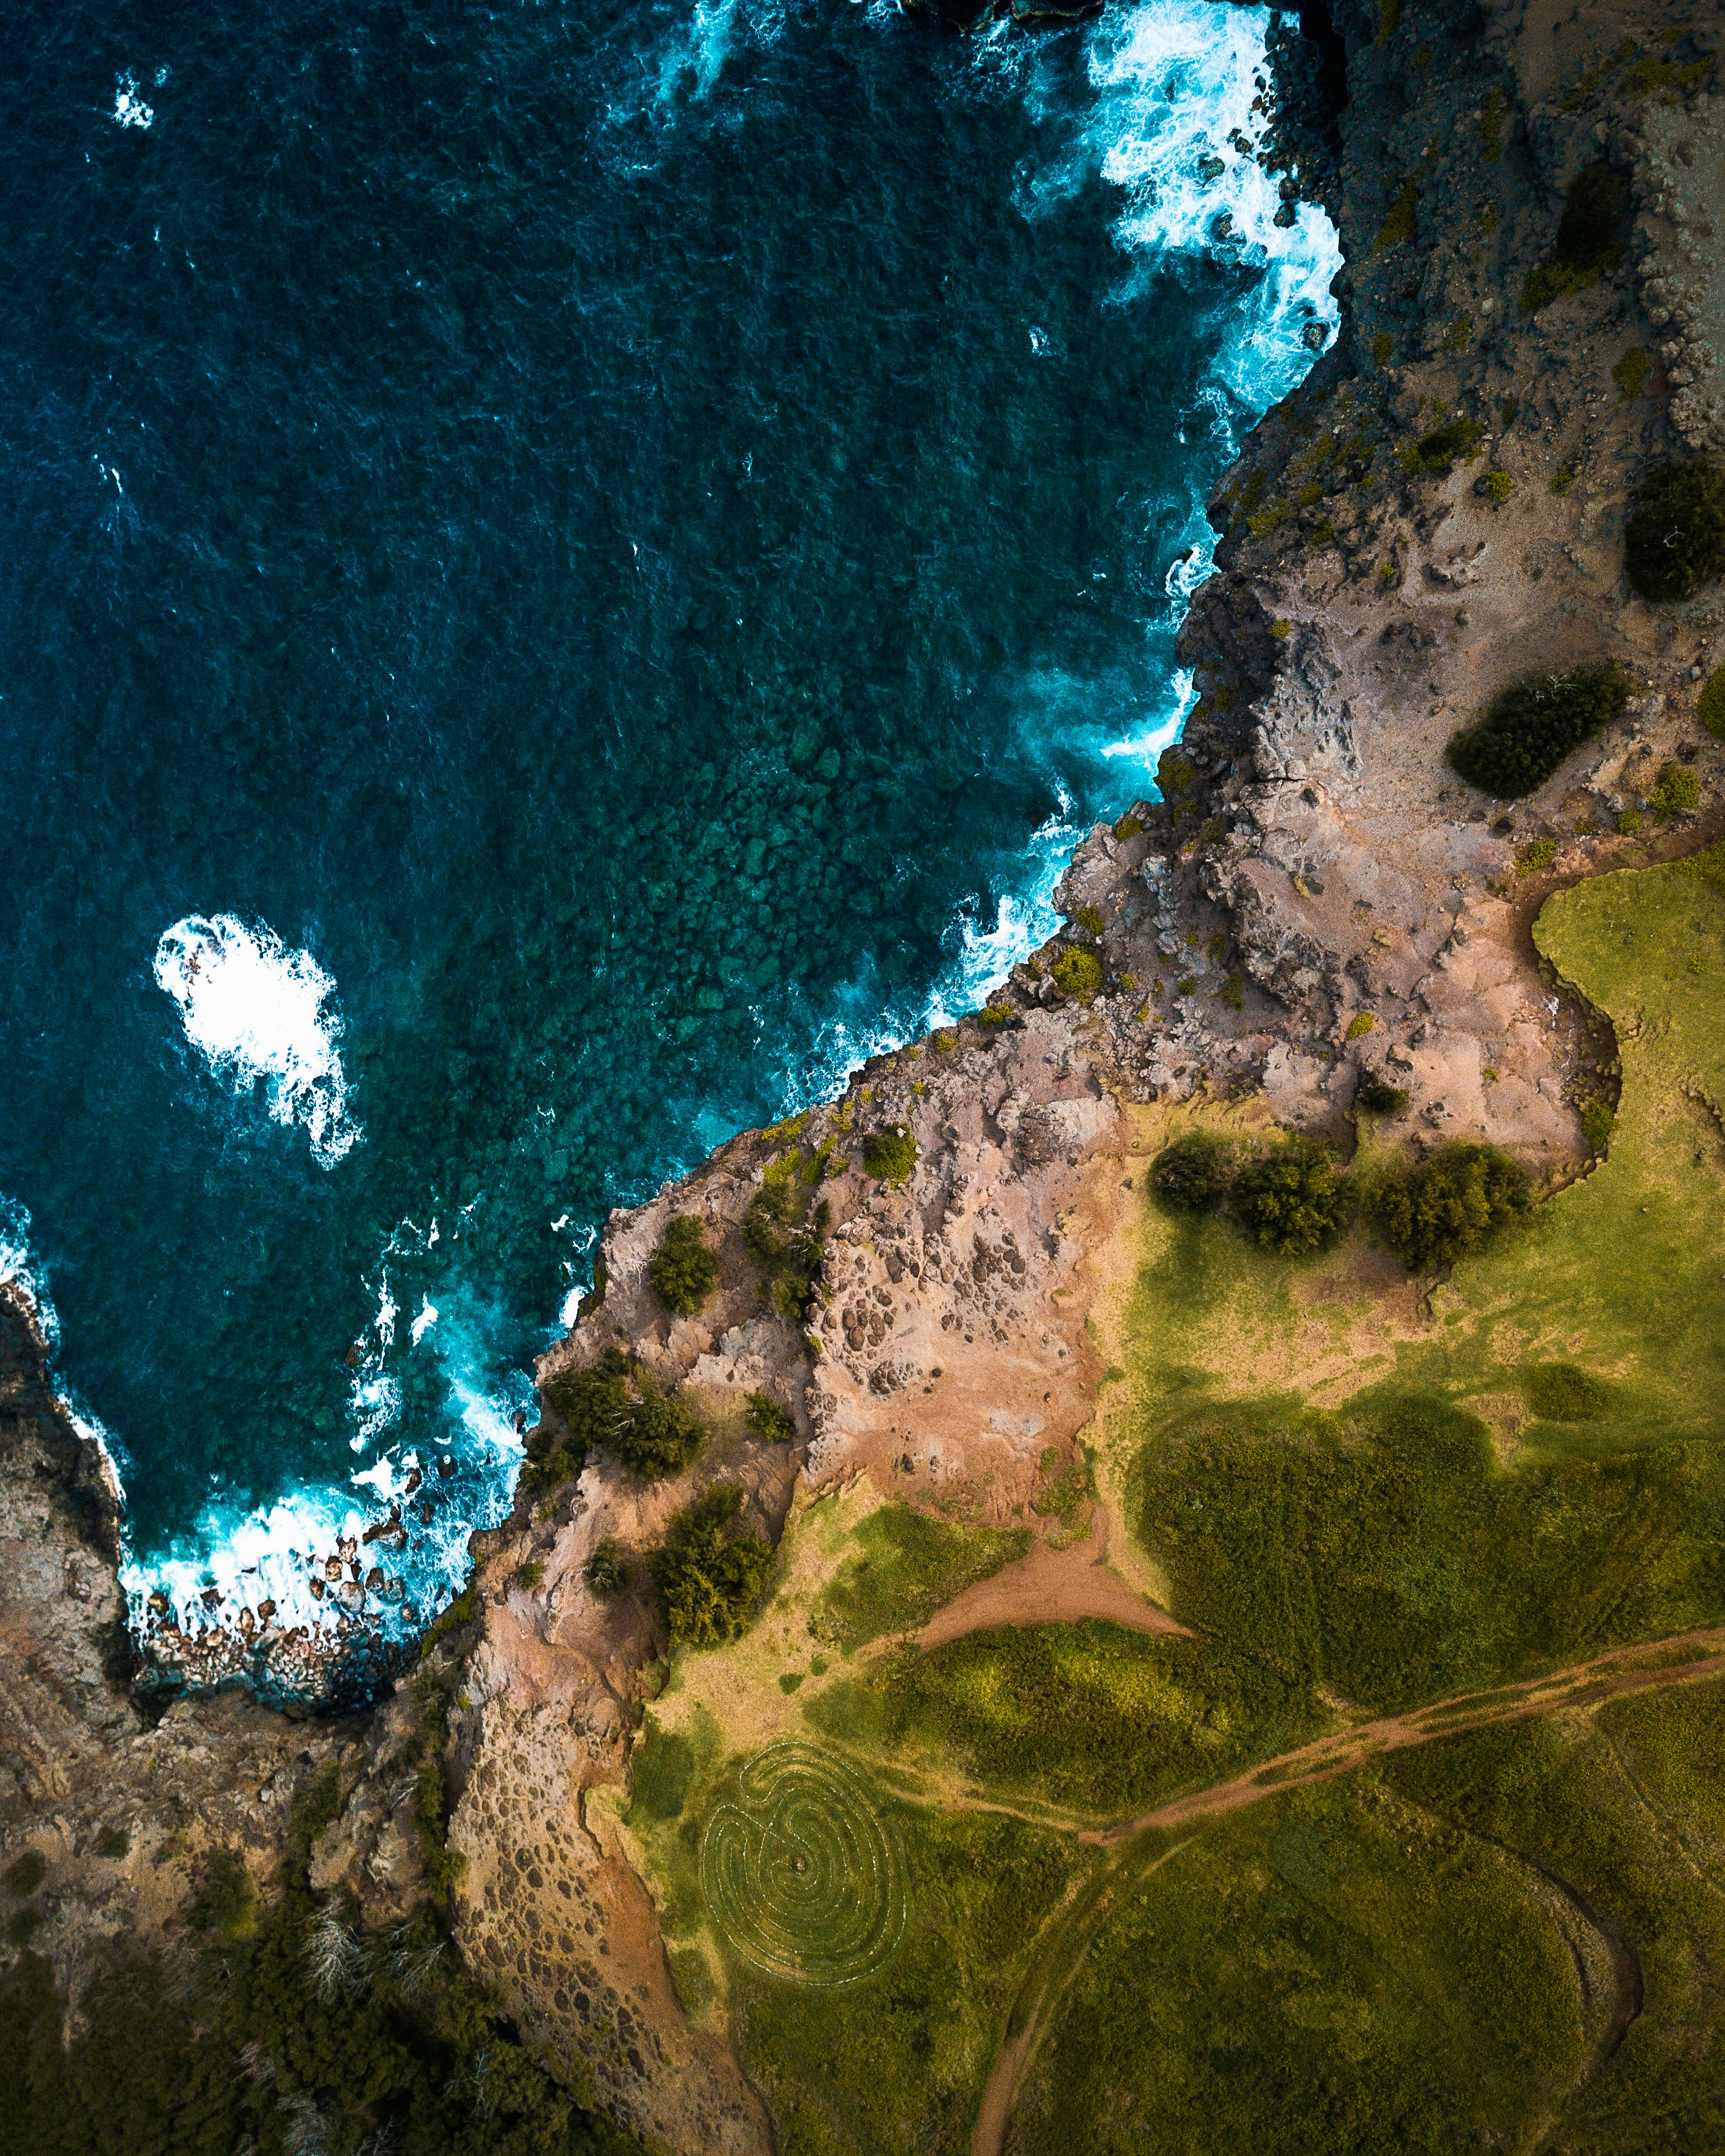 This shot is taken from the start of the Acid War Zone Trail. I was very tentative to put the drone up in the air here due to the strong winds but I’m glad I managed to fly straight up in the air and get this shot without too much risk. The North West Coast of Maui is oftened overlooked in favour of more popular destinations.... but these coastlines were very rugged and extremely fascinating to me. I’d highly recommend the trip.